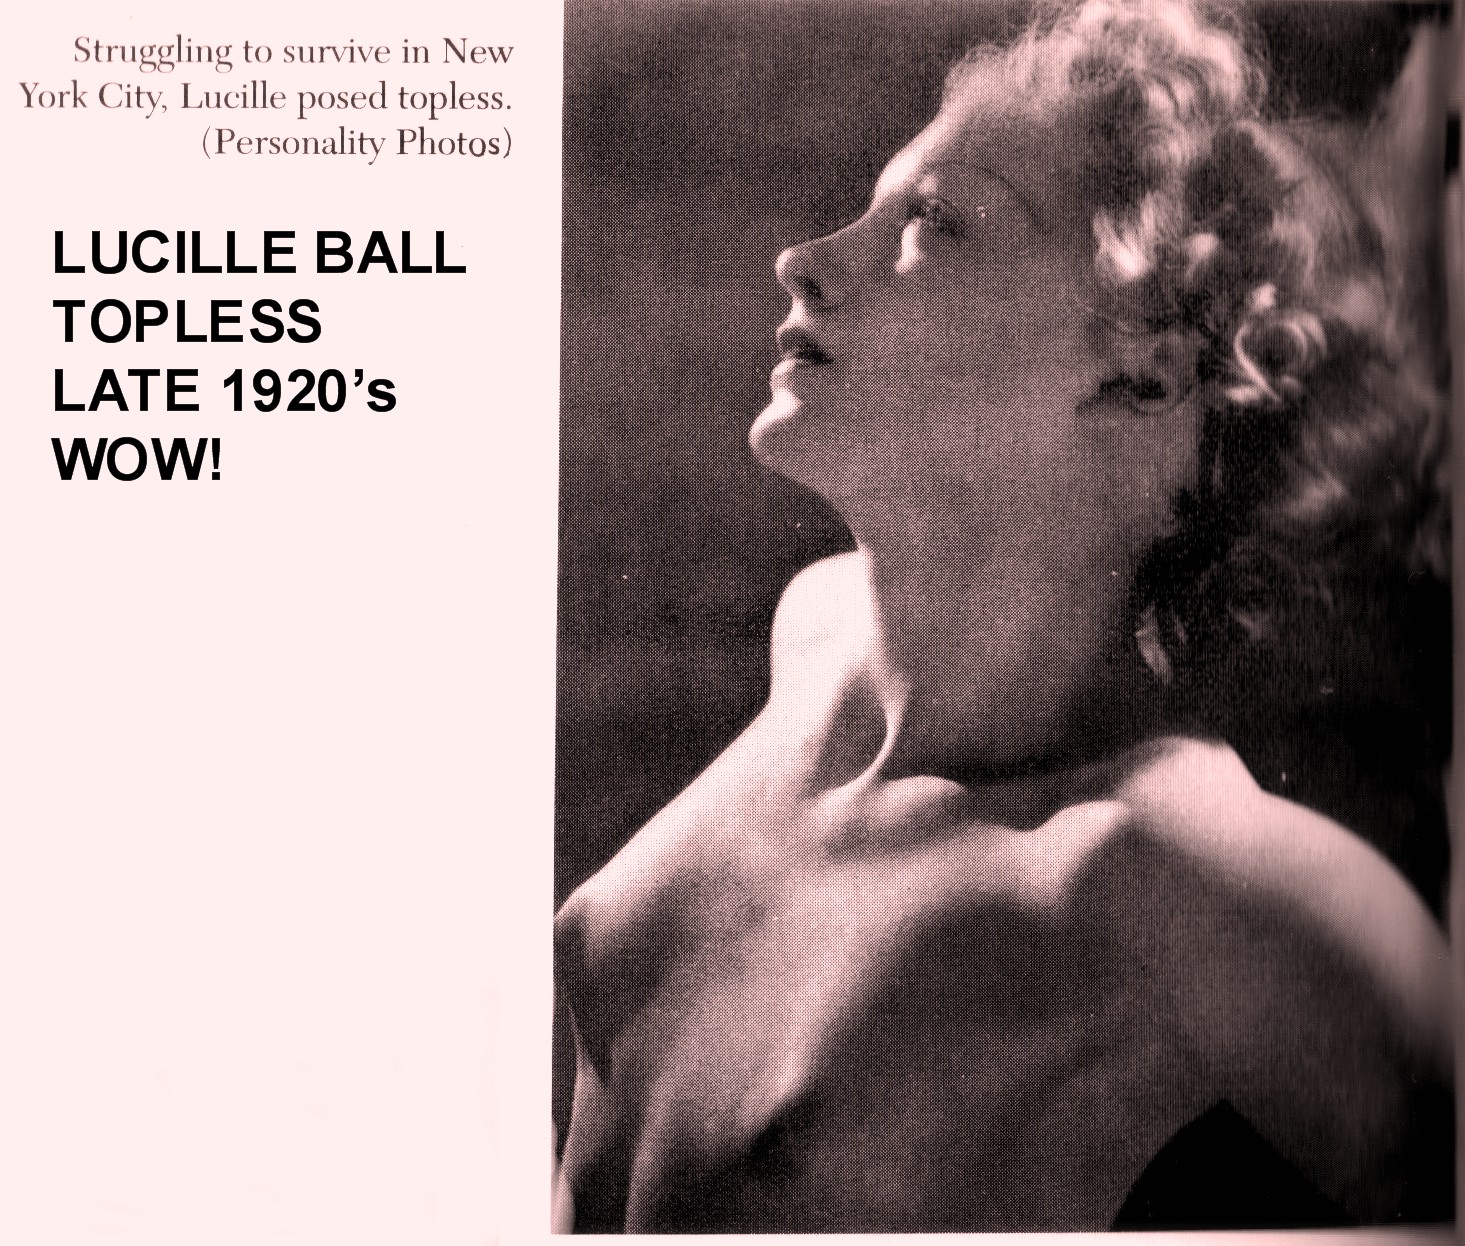 Lucille ball topless 💖 Lucille Ball posed nude for roles, so. 